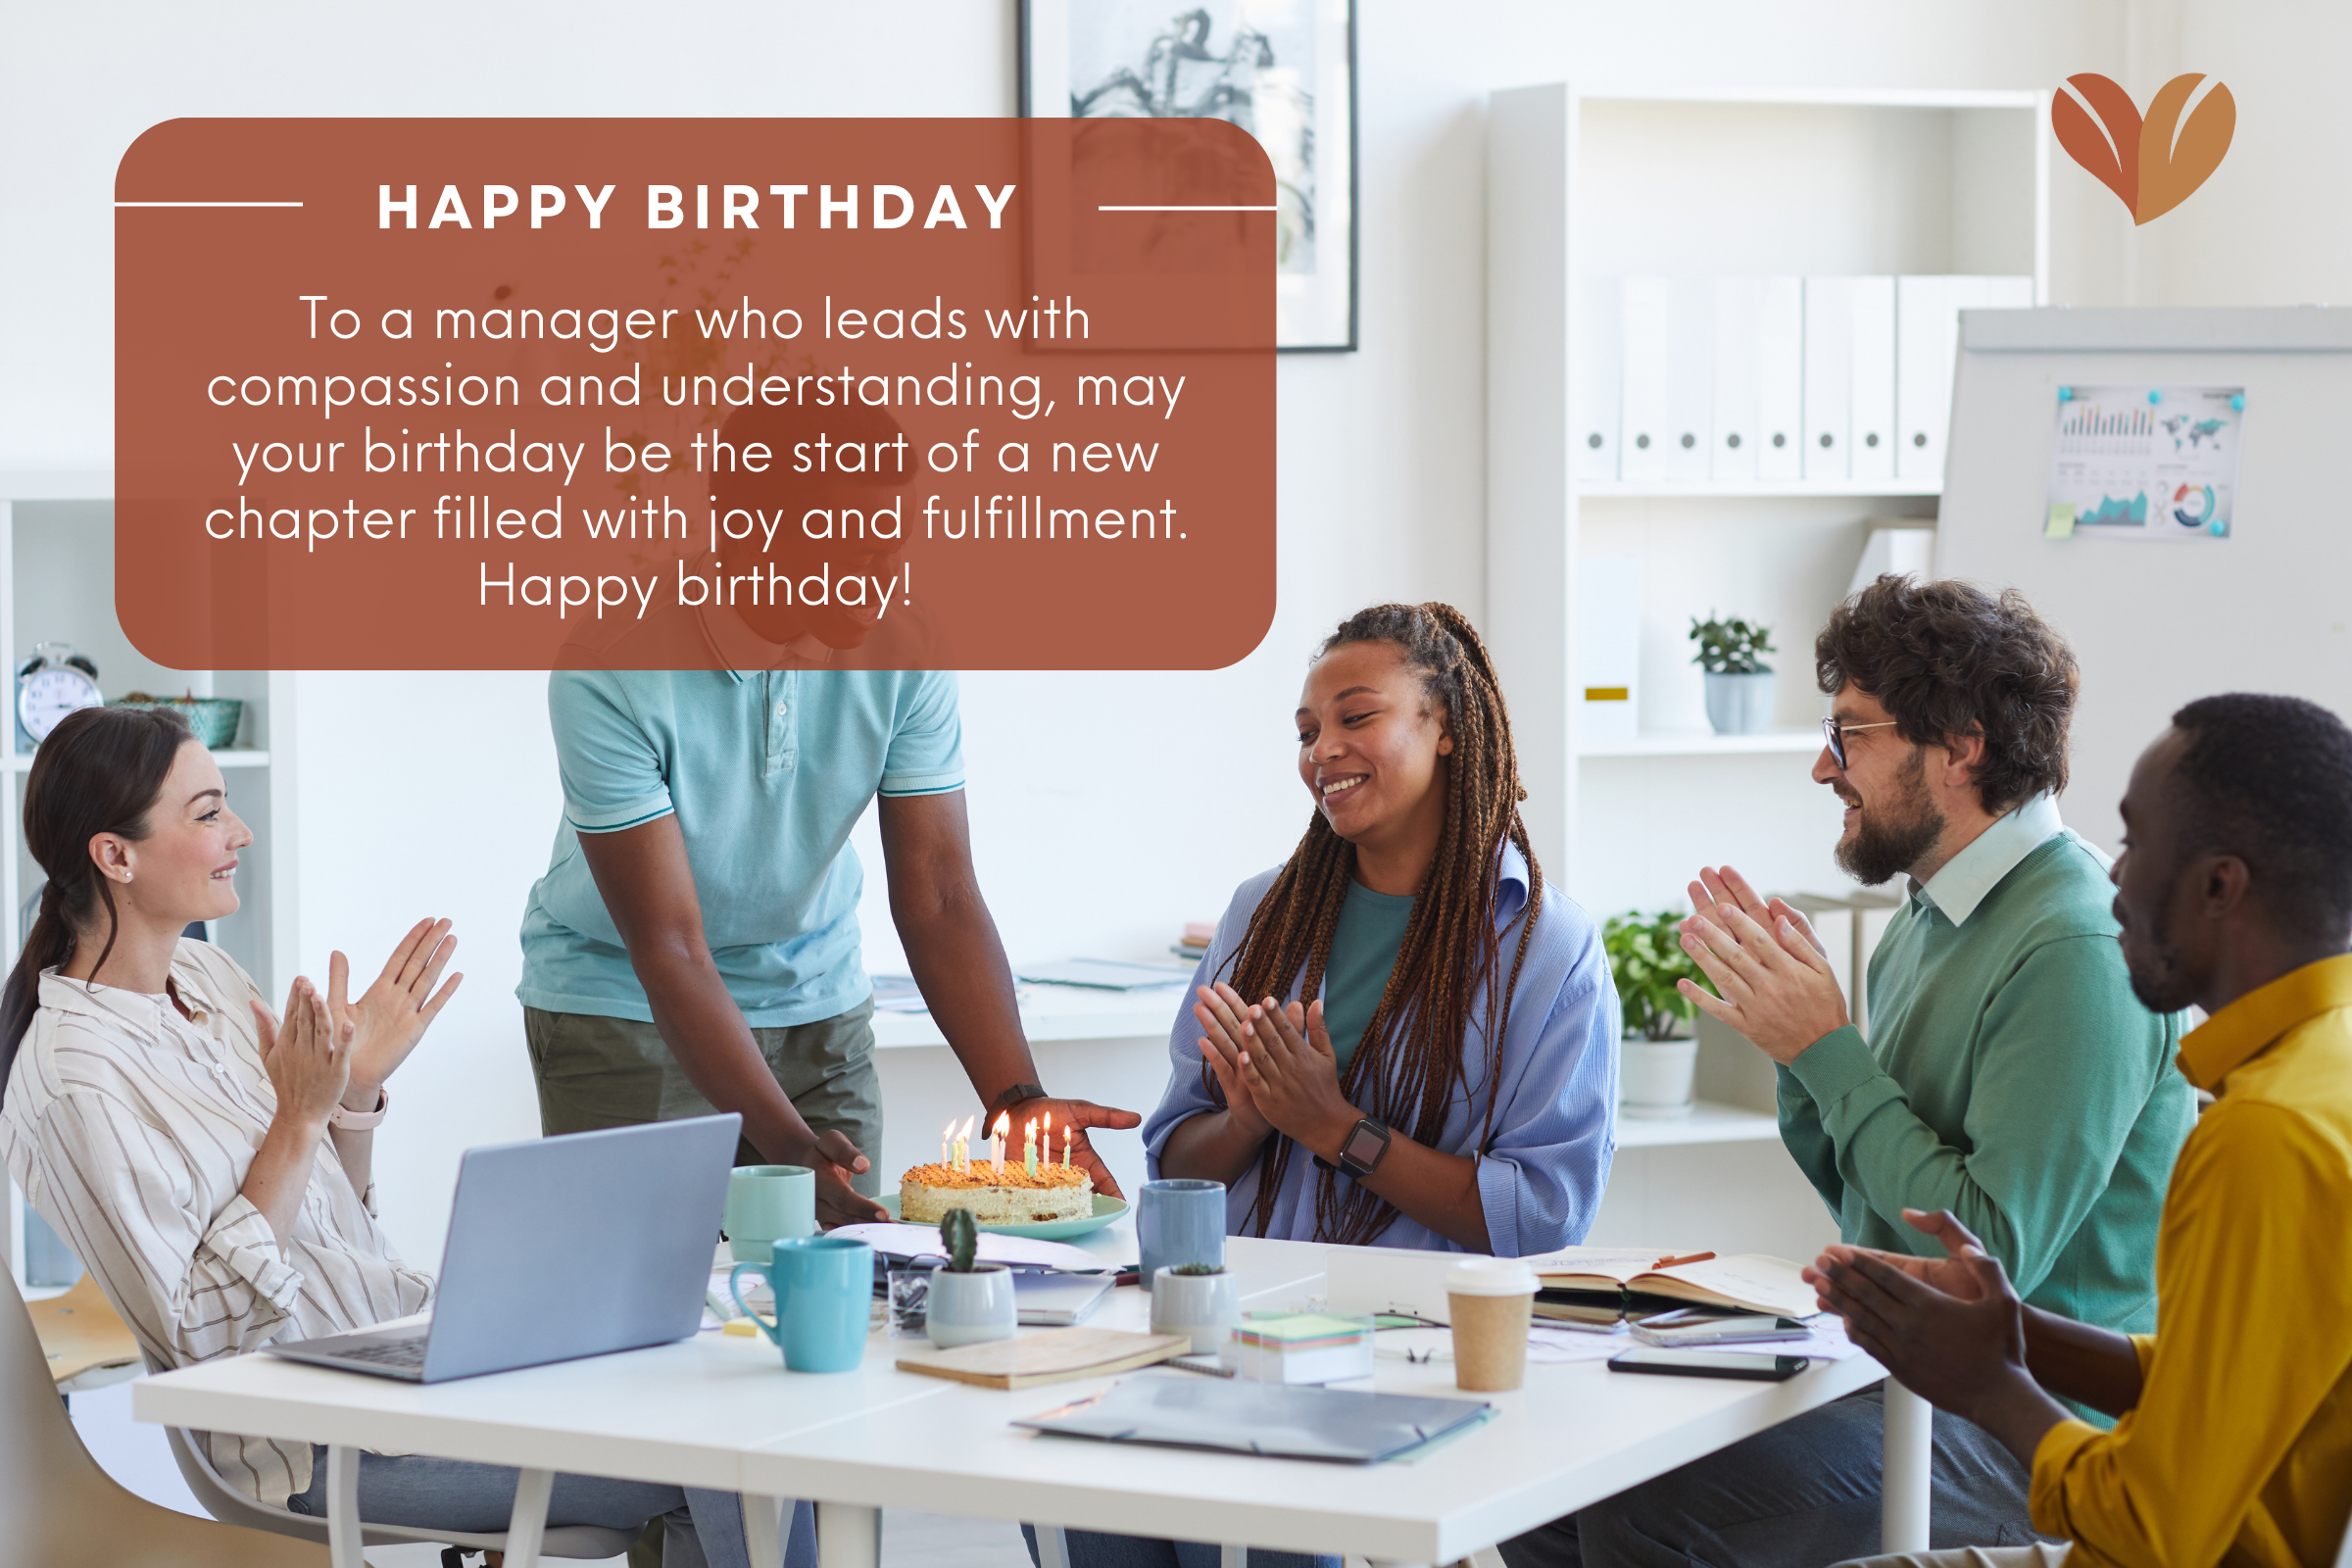 40+ Professional Birthday Wishes For Boss, Manager & More